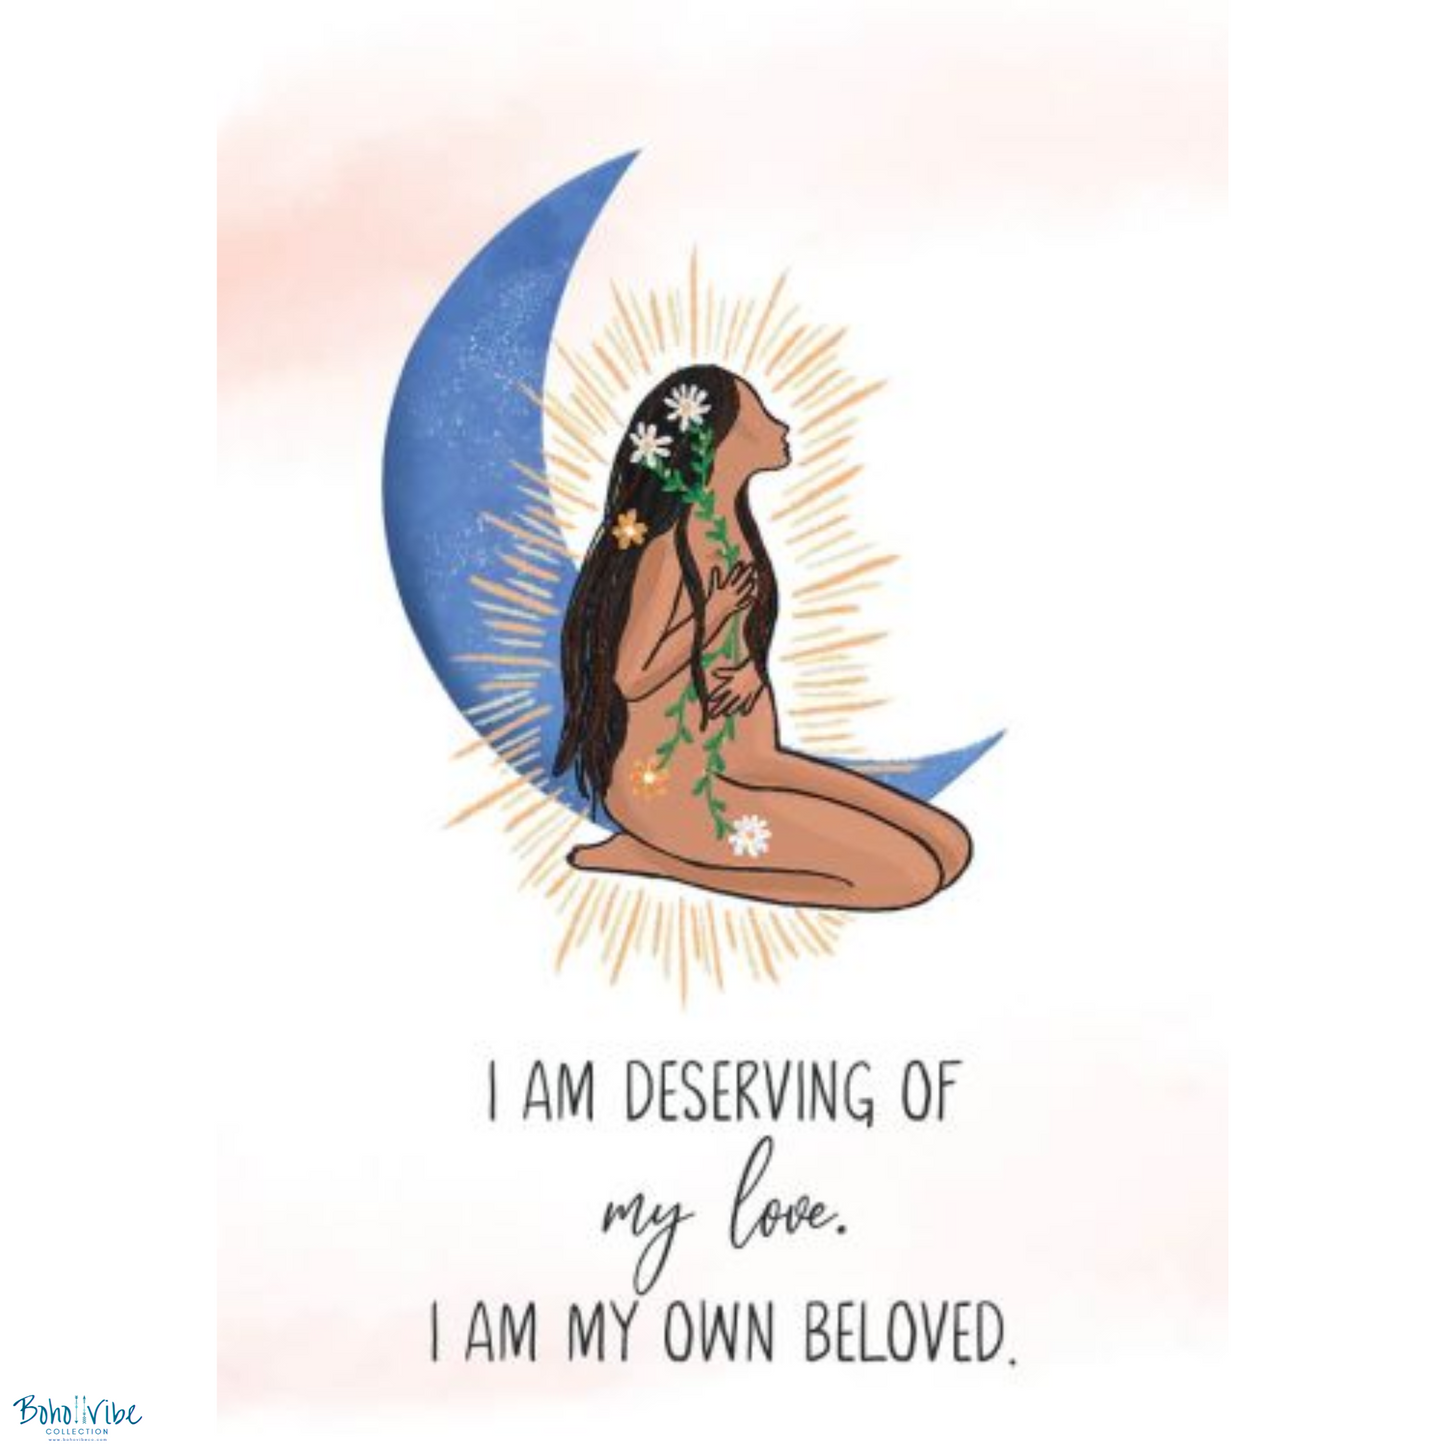 Boho ↡↟ Vibe Collection ↠ Wisdom Del Alma: 44 Affirmation Cards to Activate Your Inner Diosa 